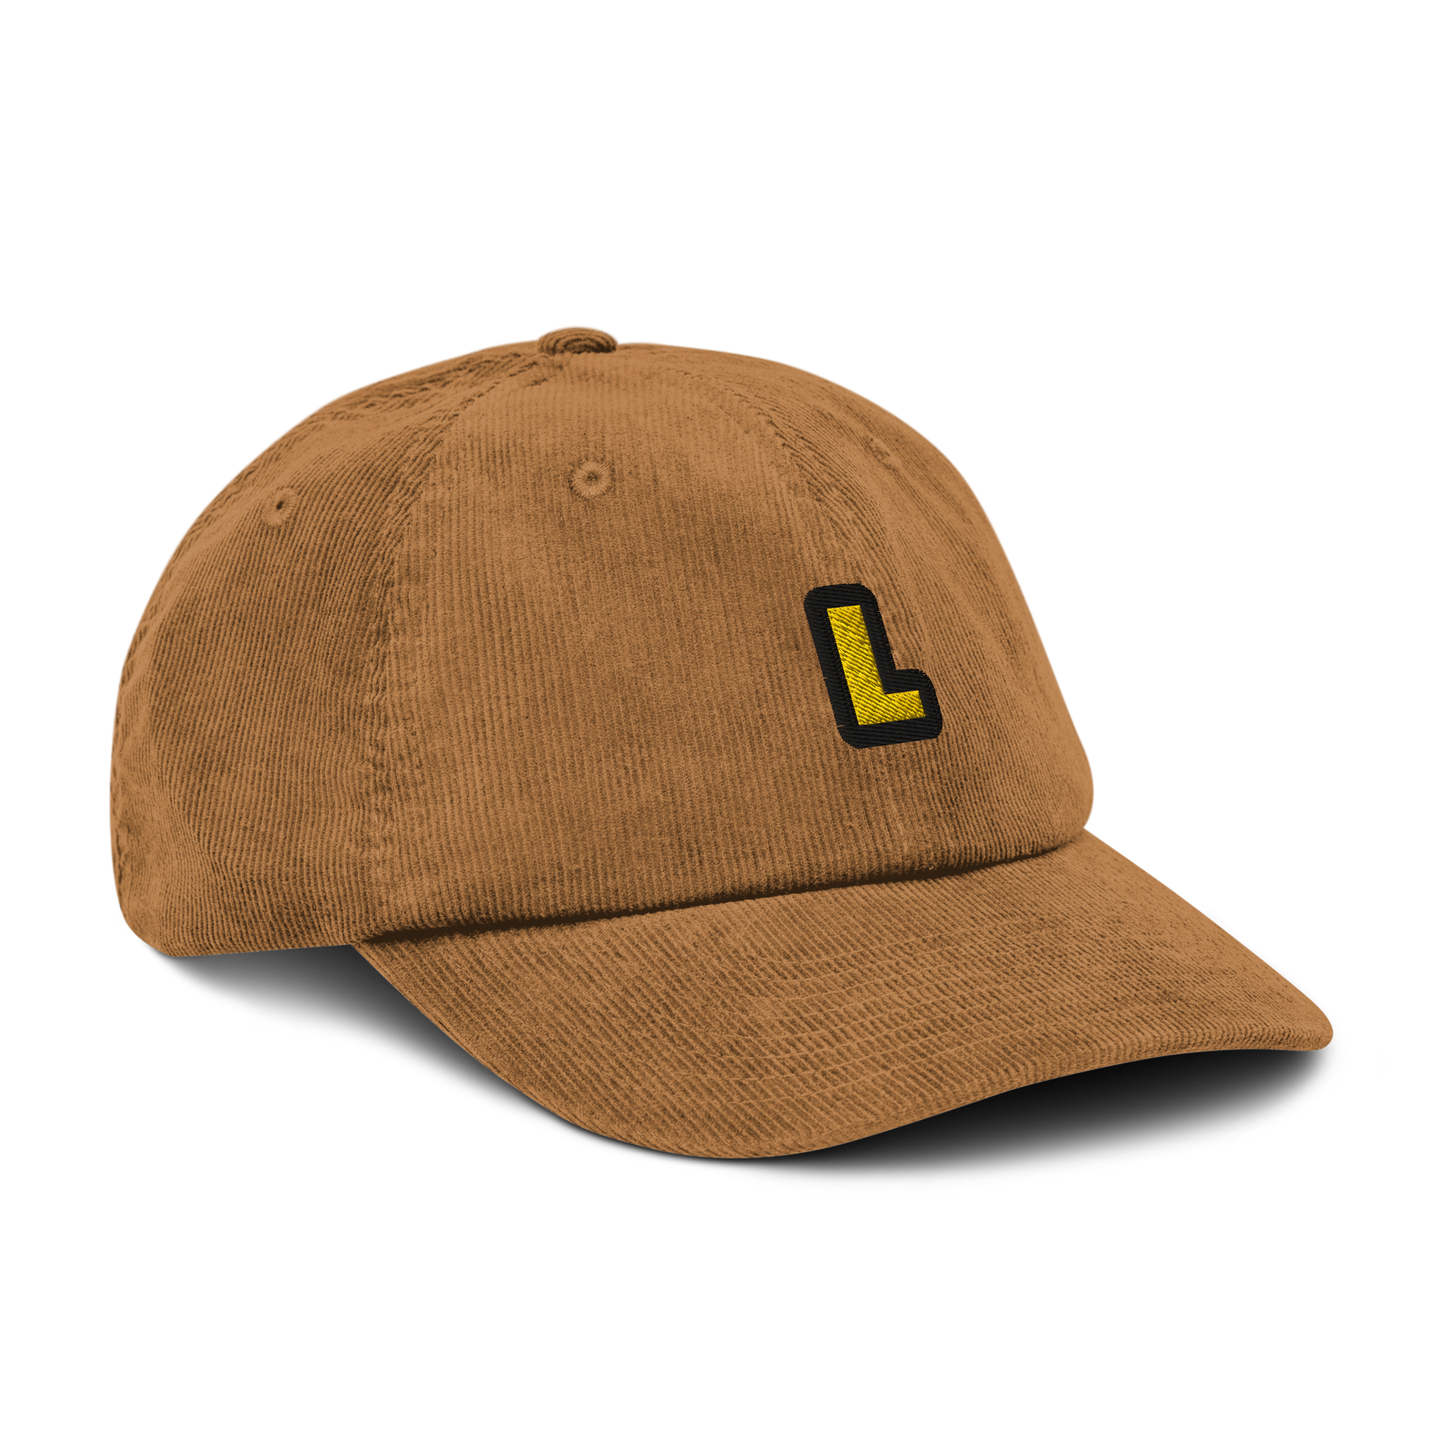 L - The letter collection - Corduroy hat